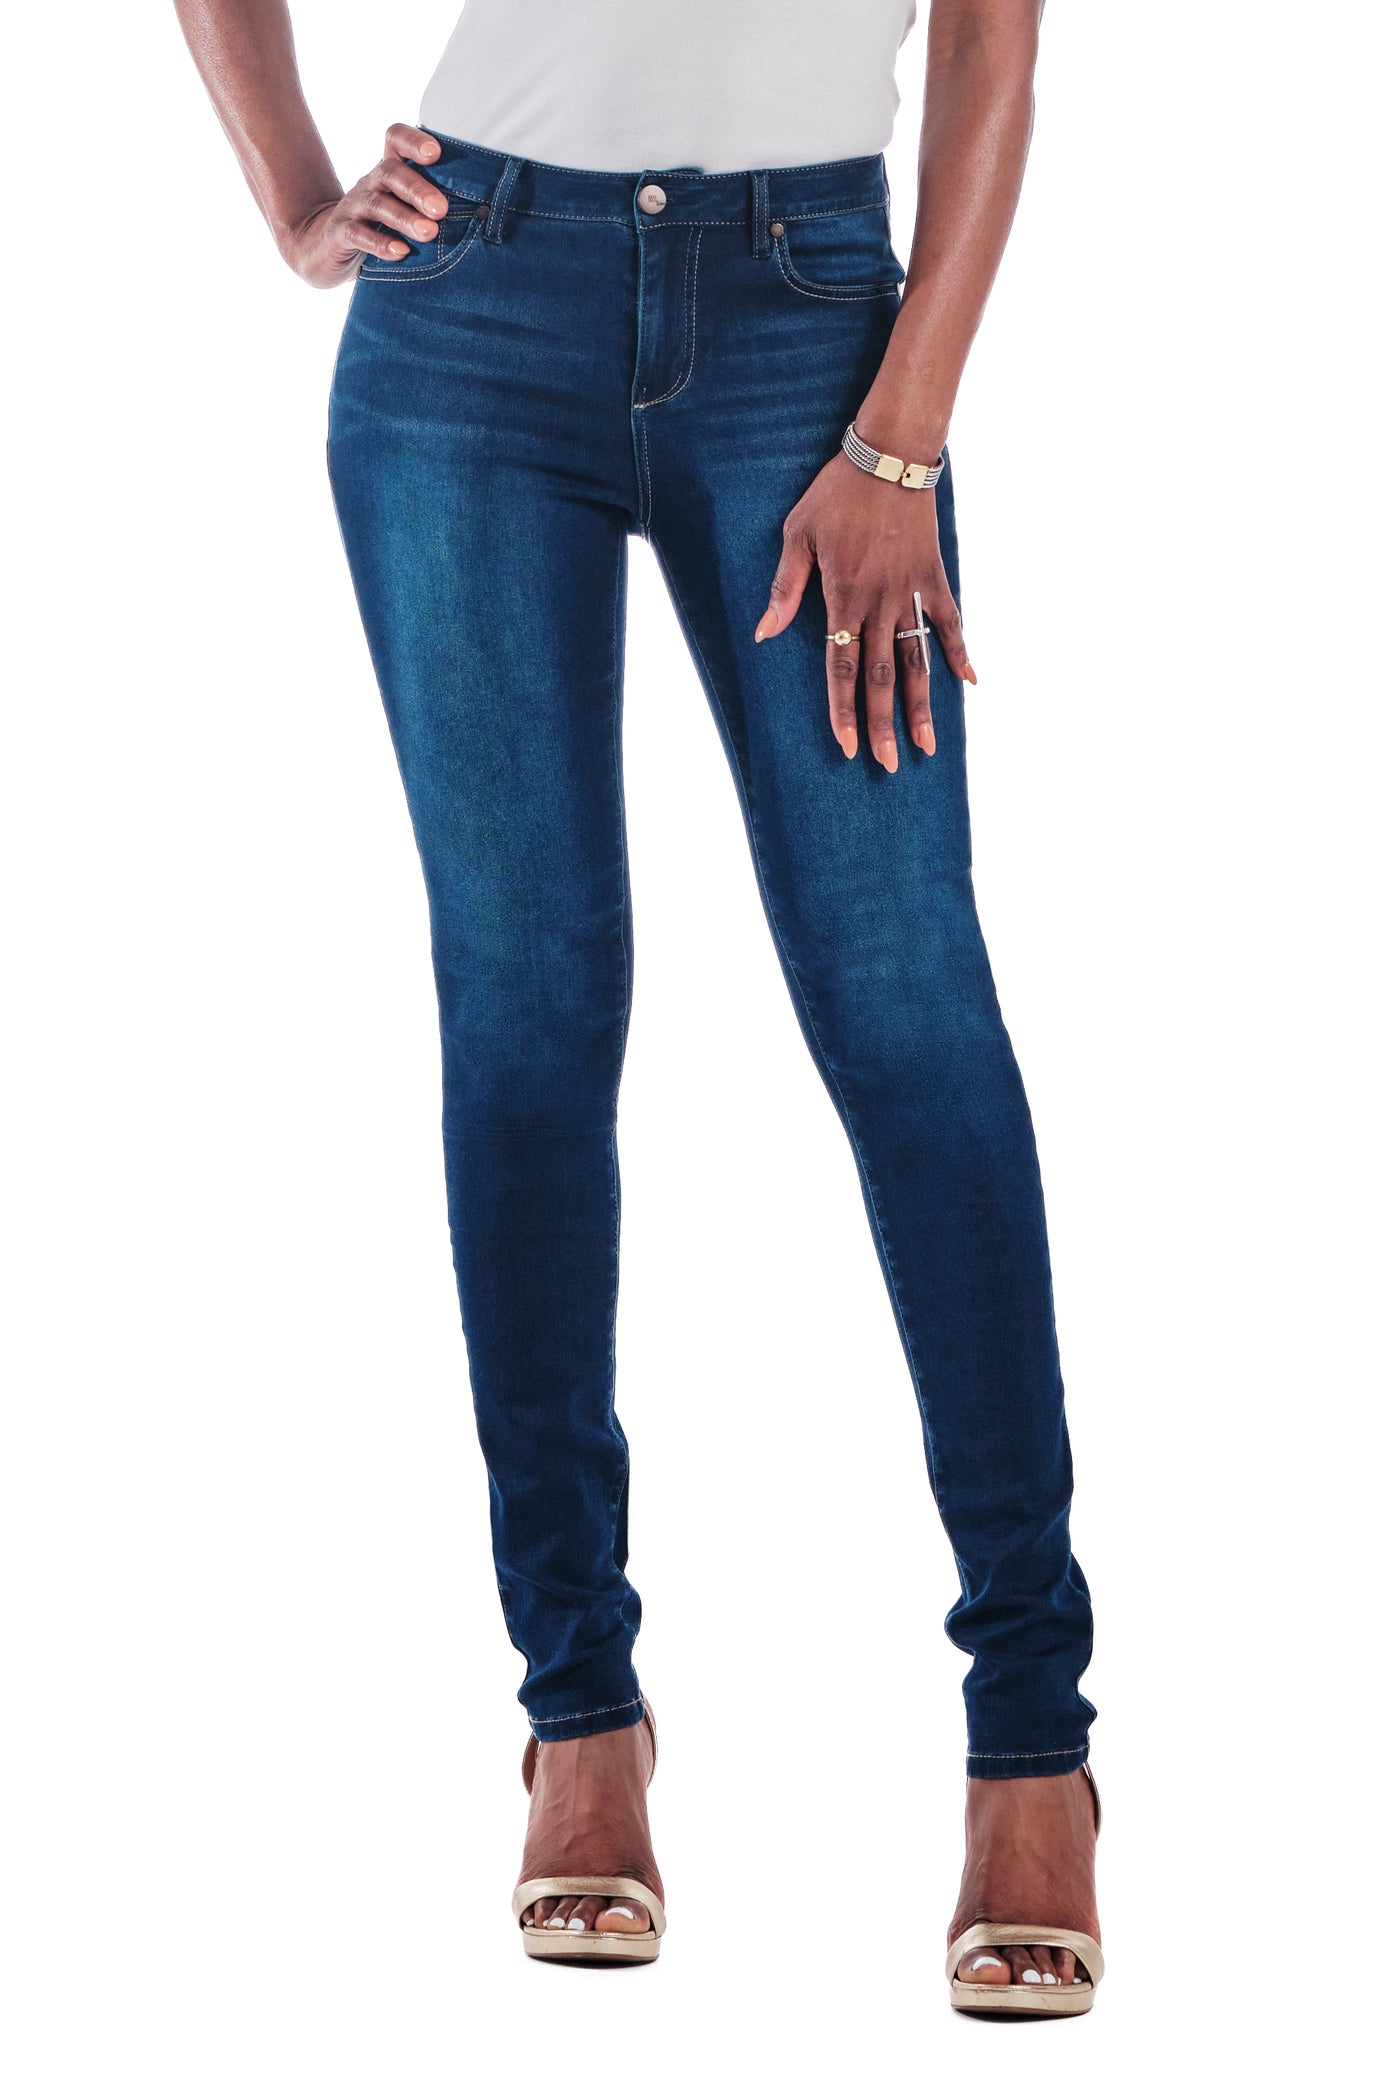 Stretch Me Out Curvy Jeggings - Dark Wash – Specialty Design Company